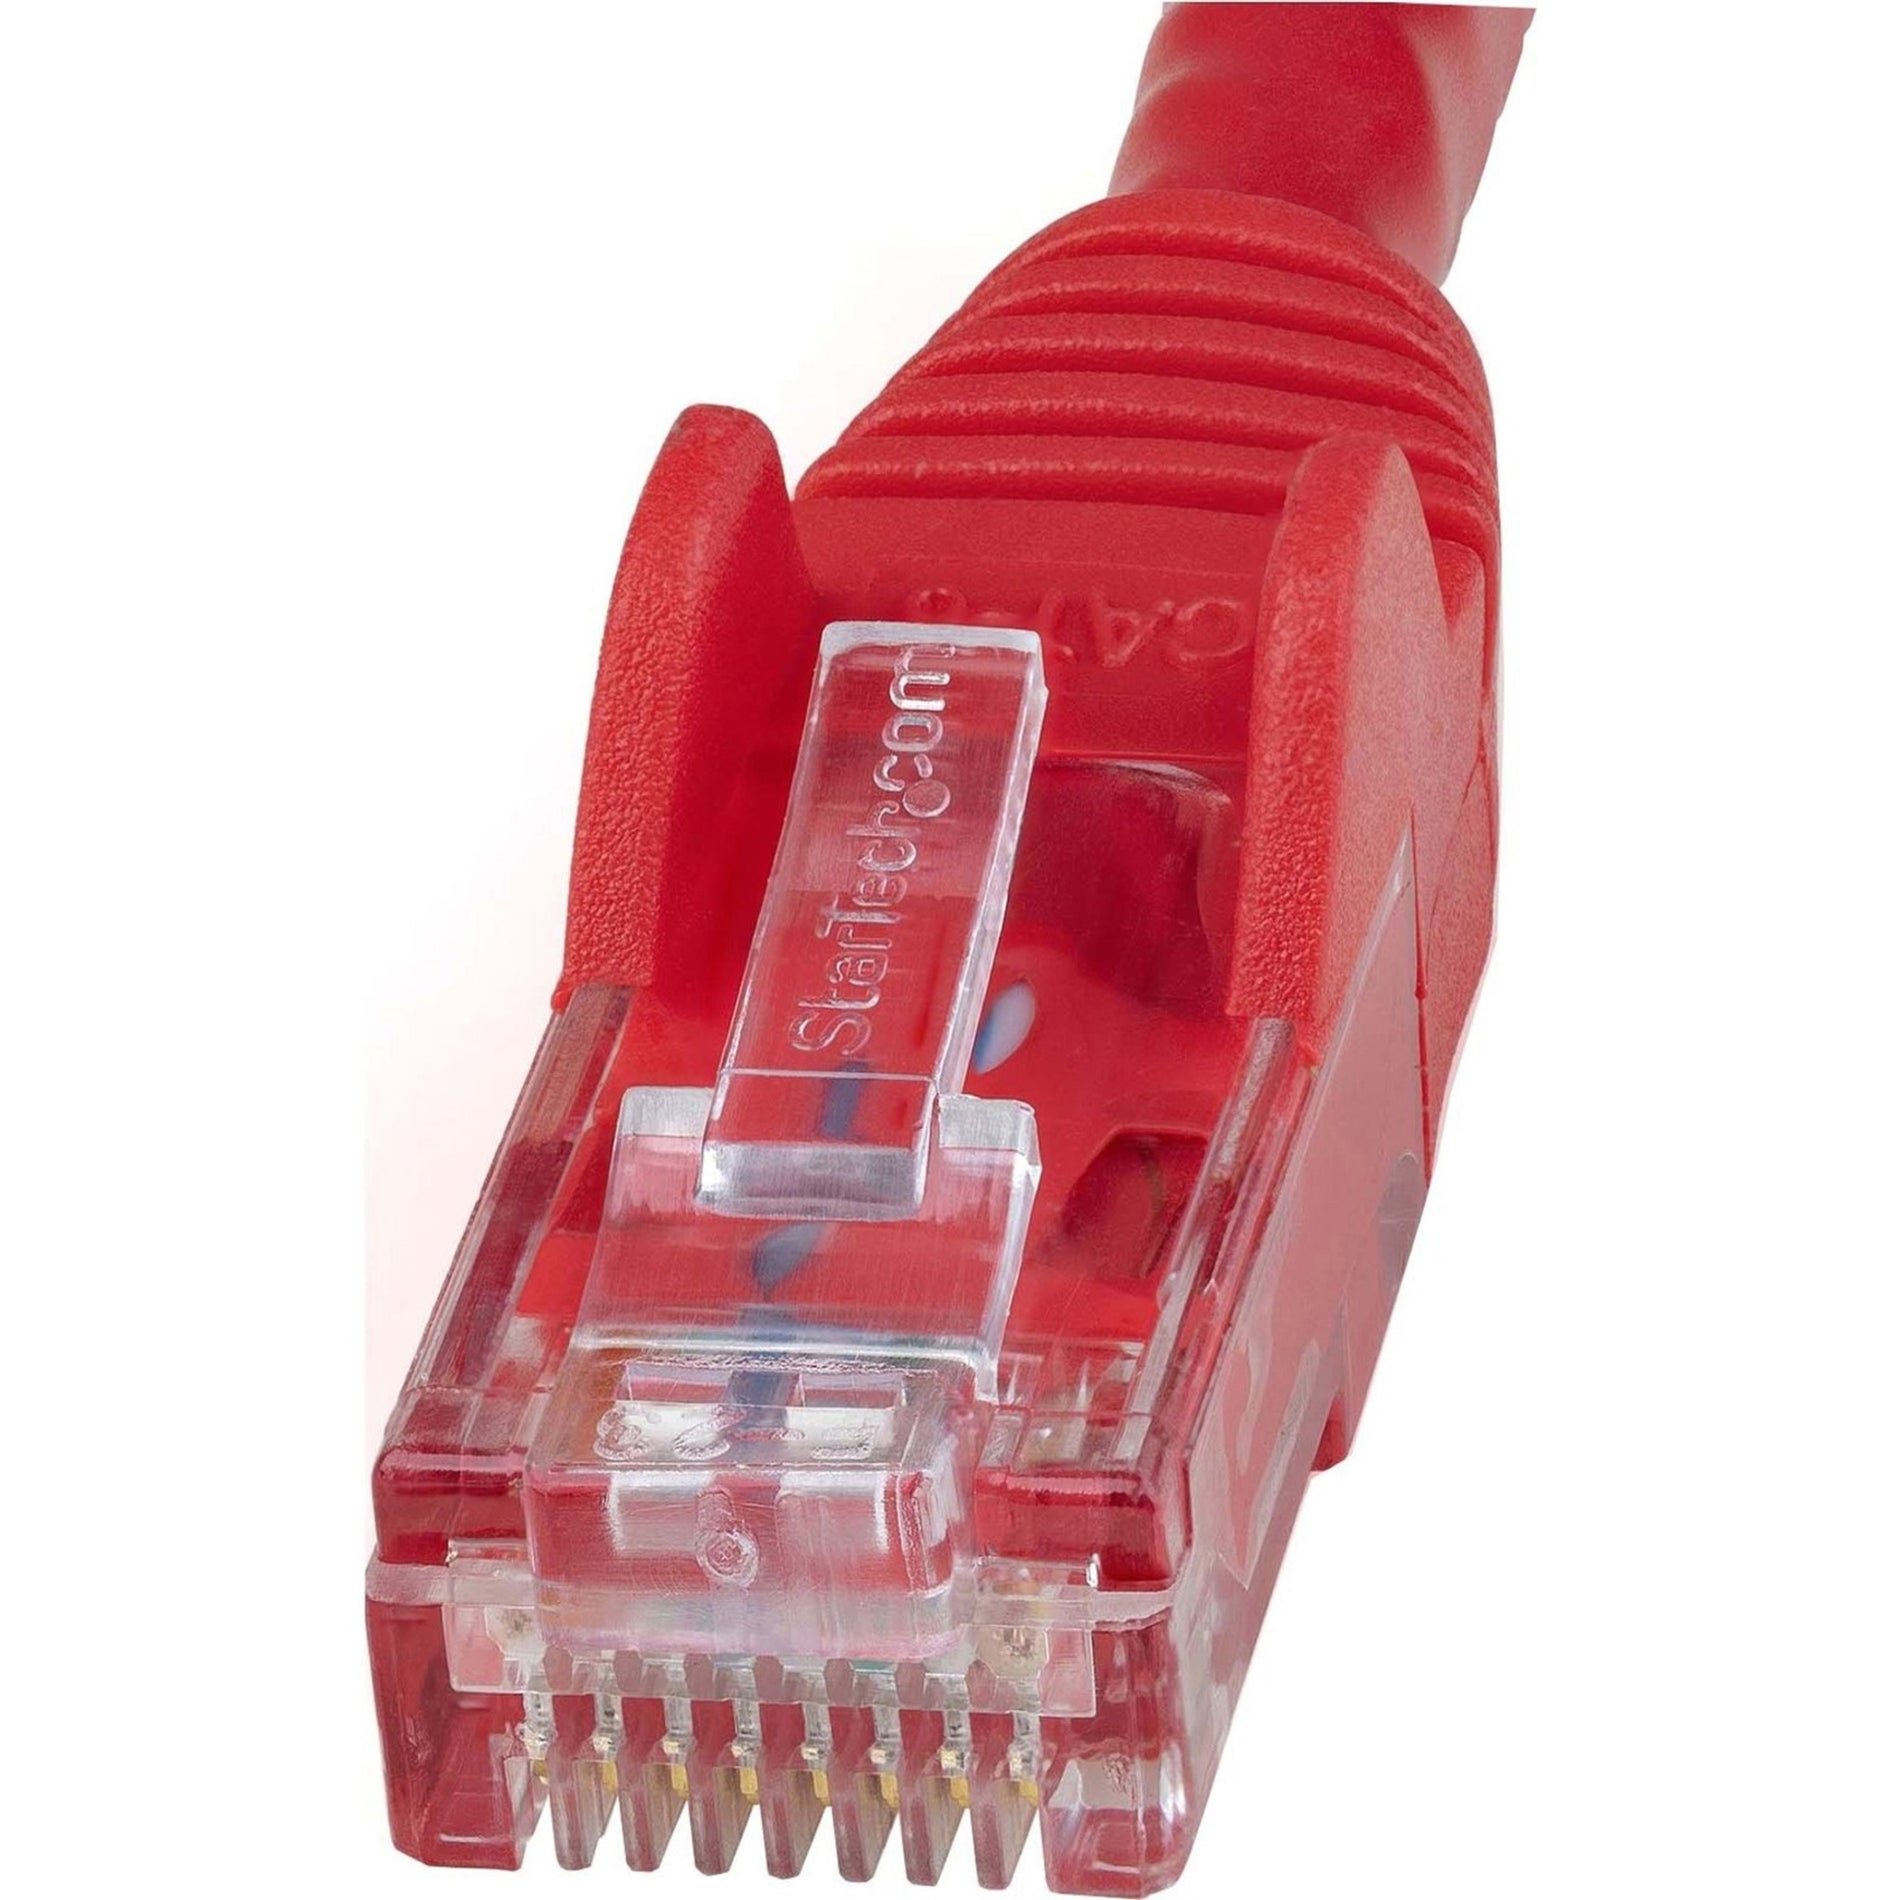 StarTech.com N6PATCH6RD Cat6 Patch Cable, 6 ft Red Ethernet Cable, Snagless RJ45 Connectors